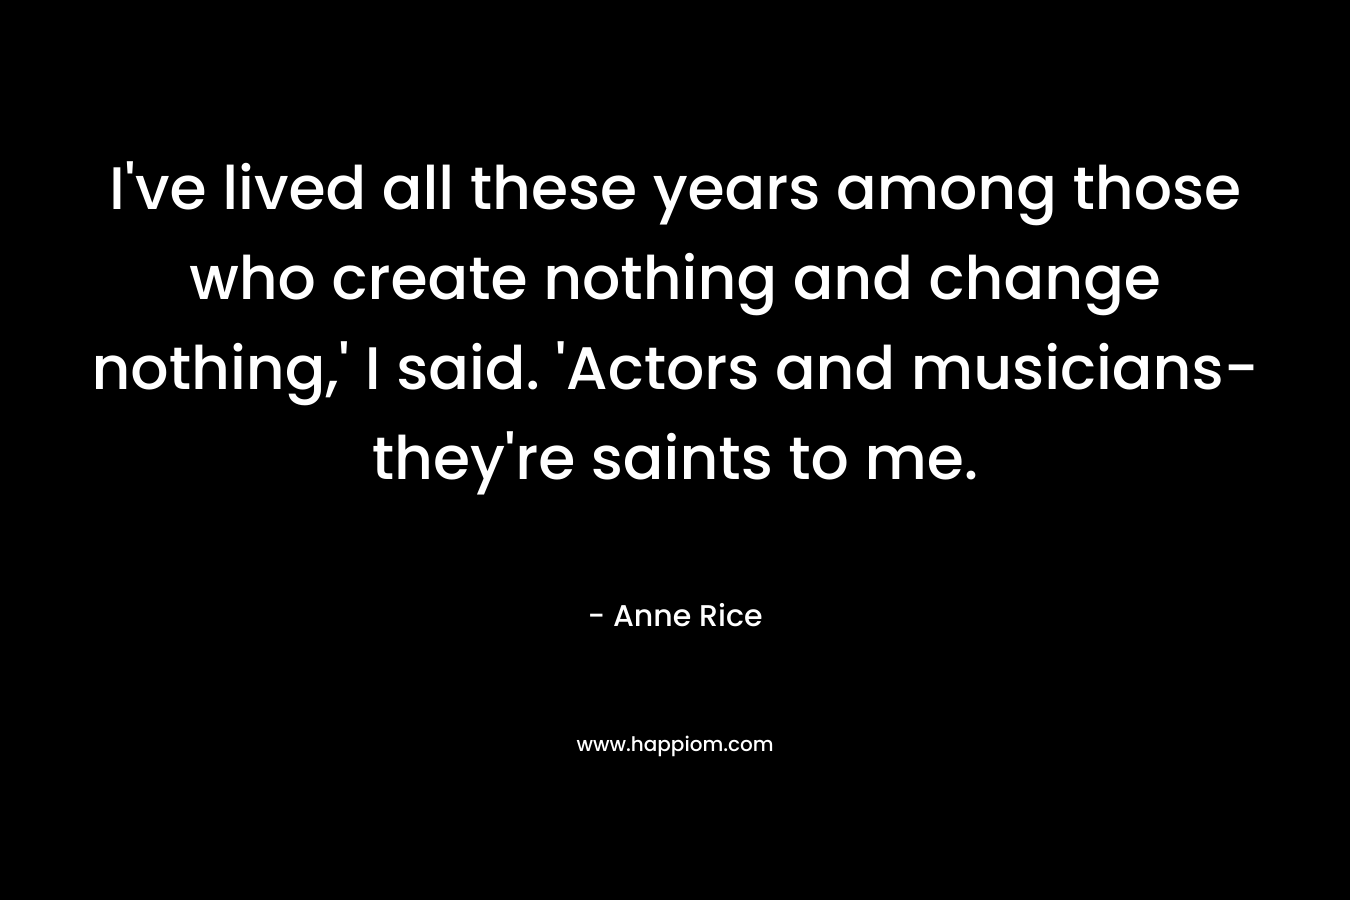 I’ve lived all these years among those who create nothing and change nothing,’ I said. ‘Actors and musicians-they’re saints to me. – Anne Rice